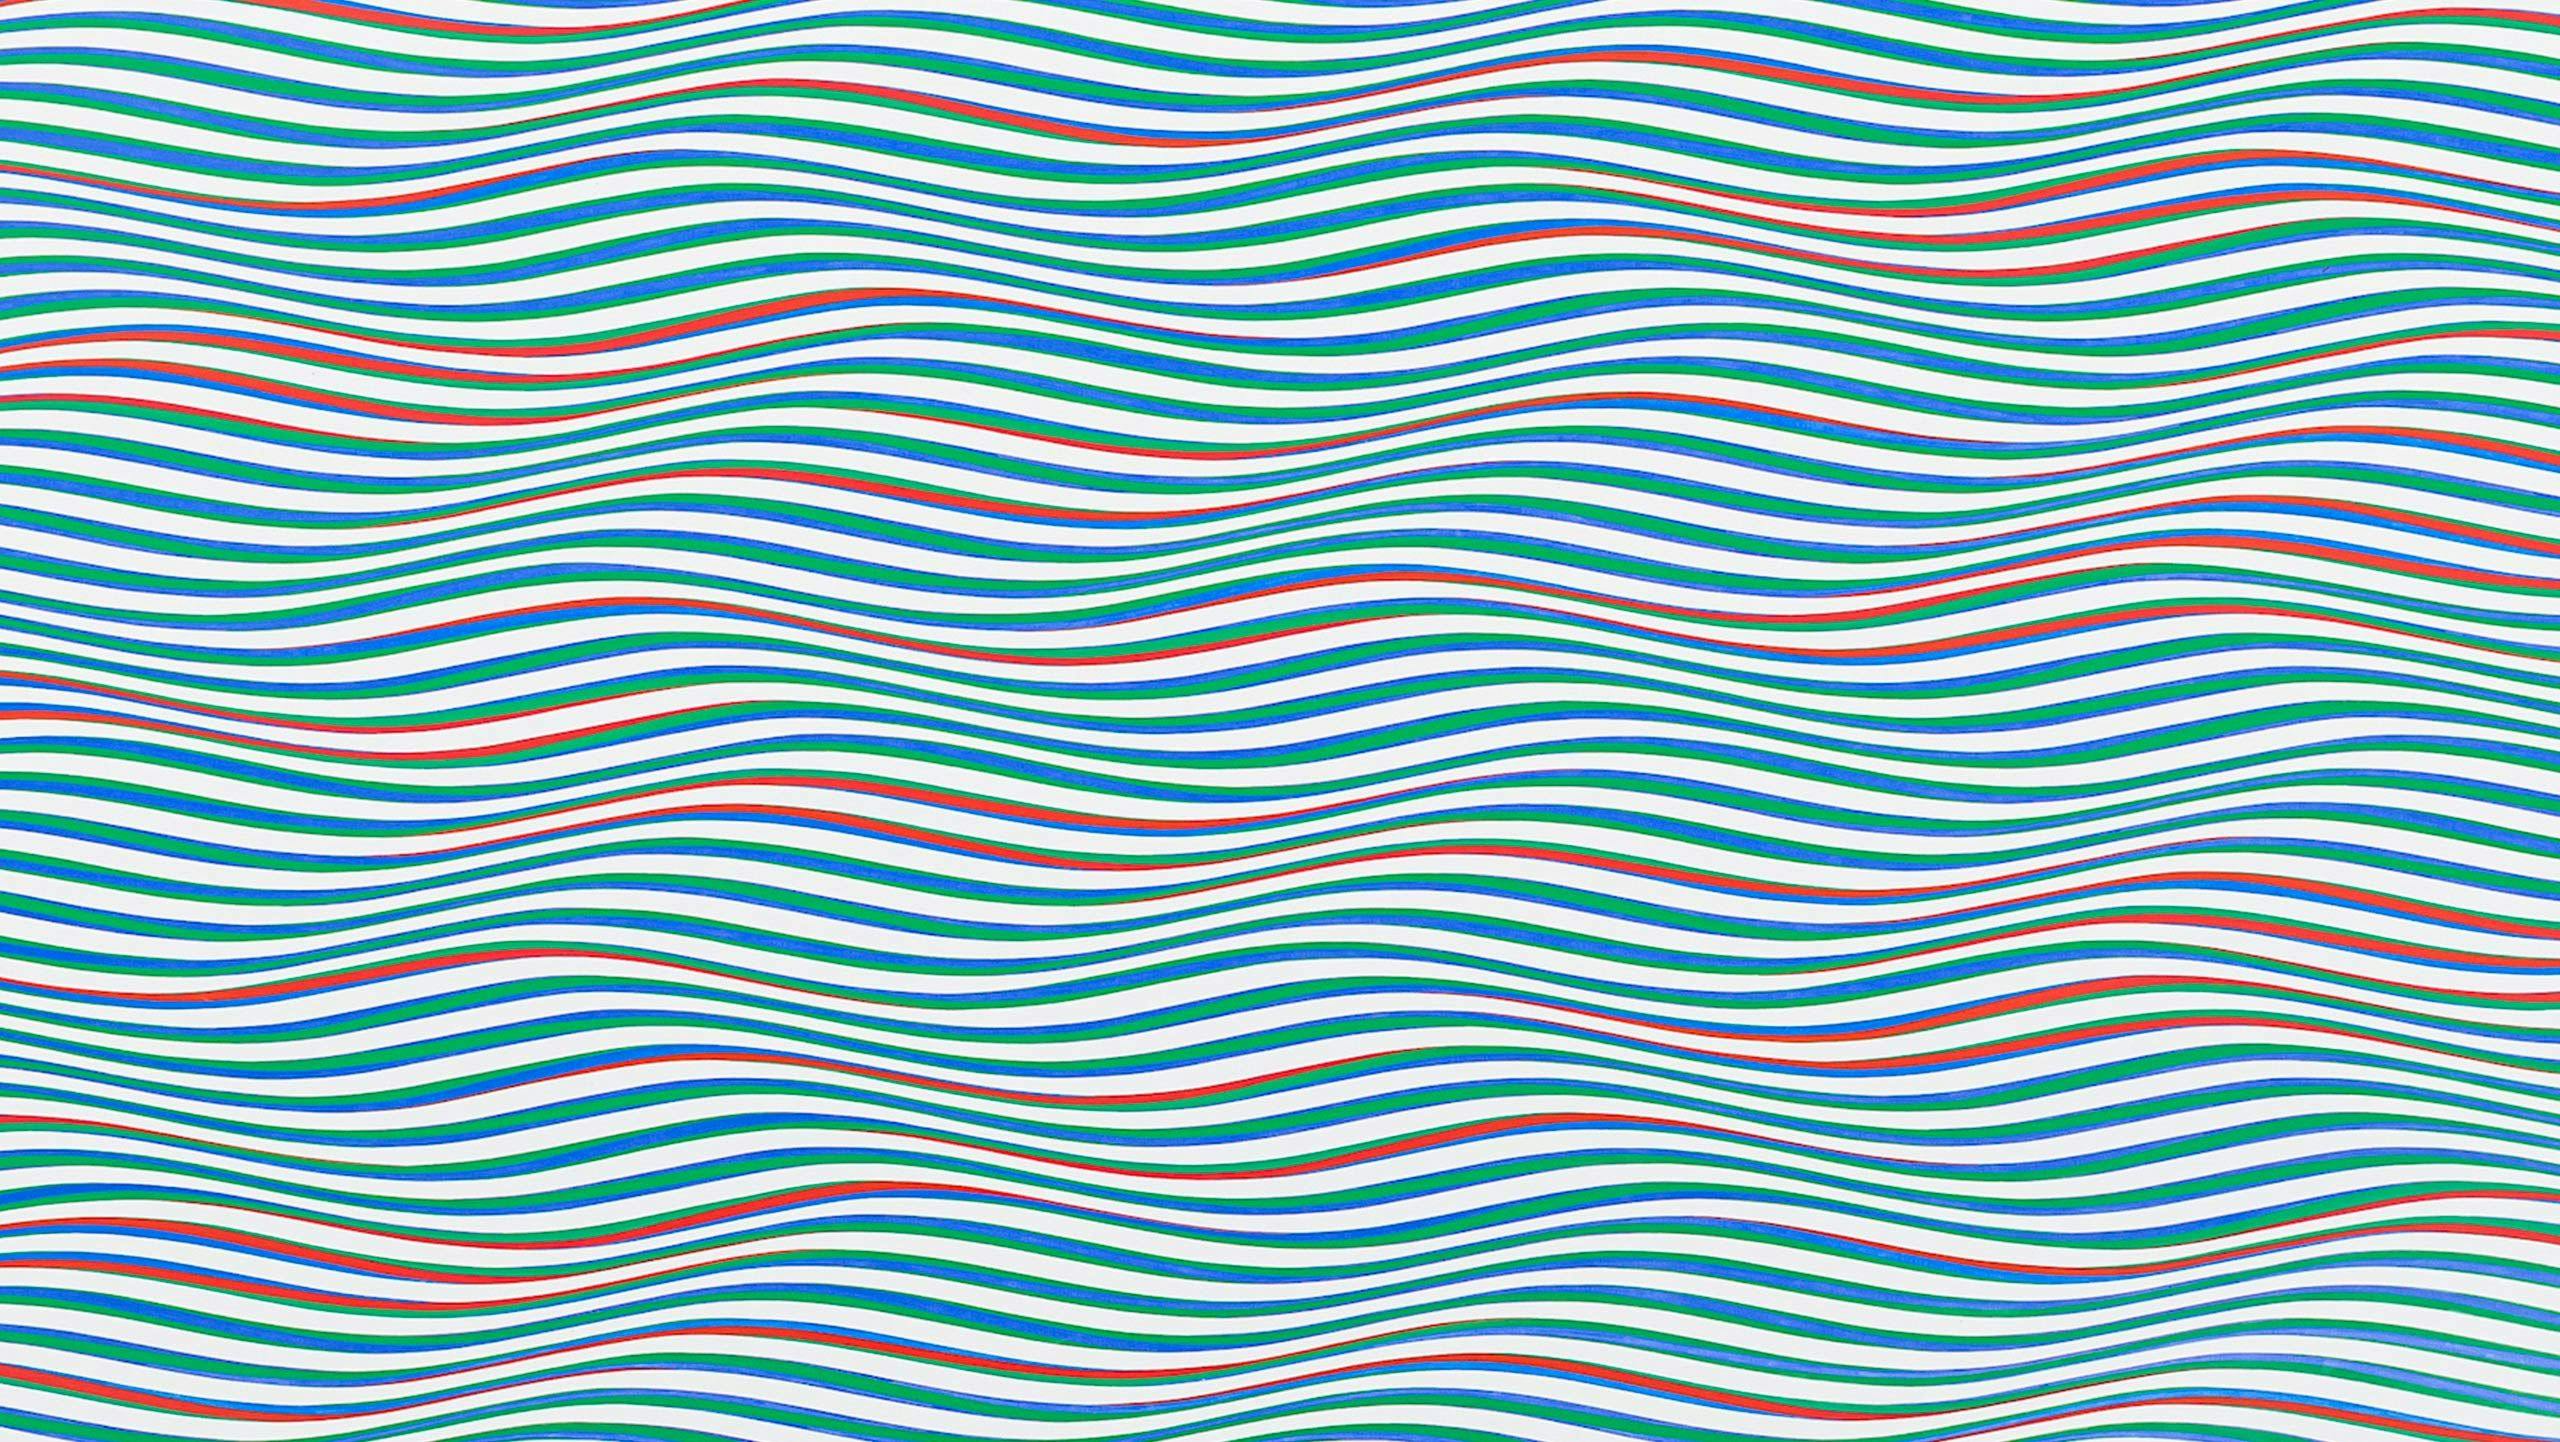 A painting by Bridget Riley titled Streak III, dated 1980.